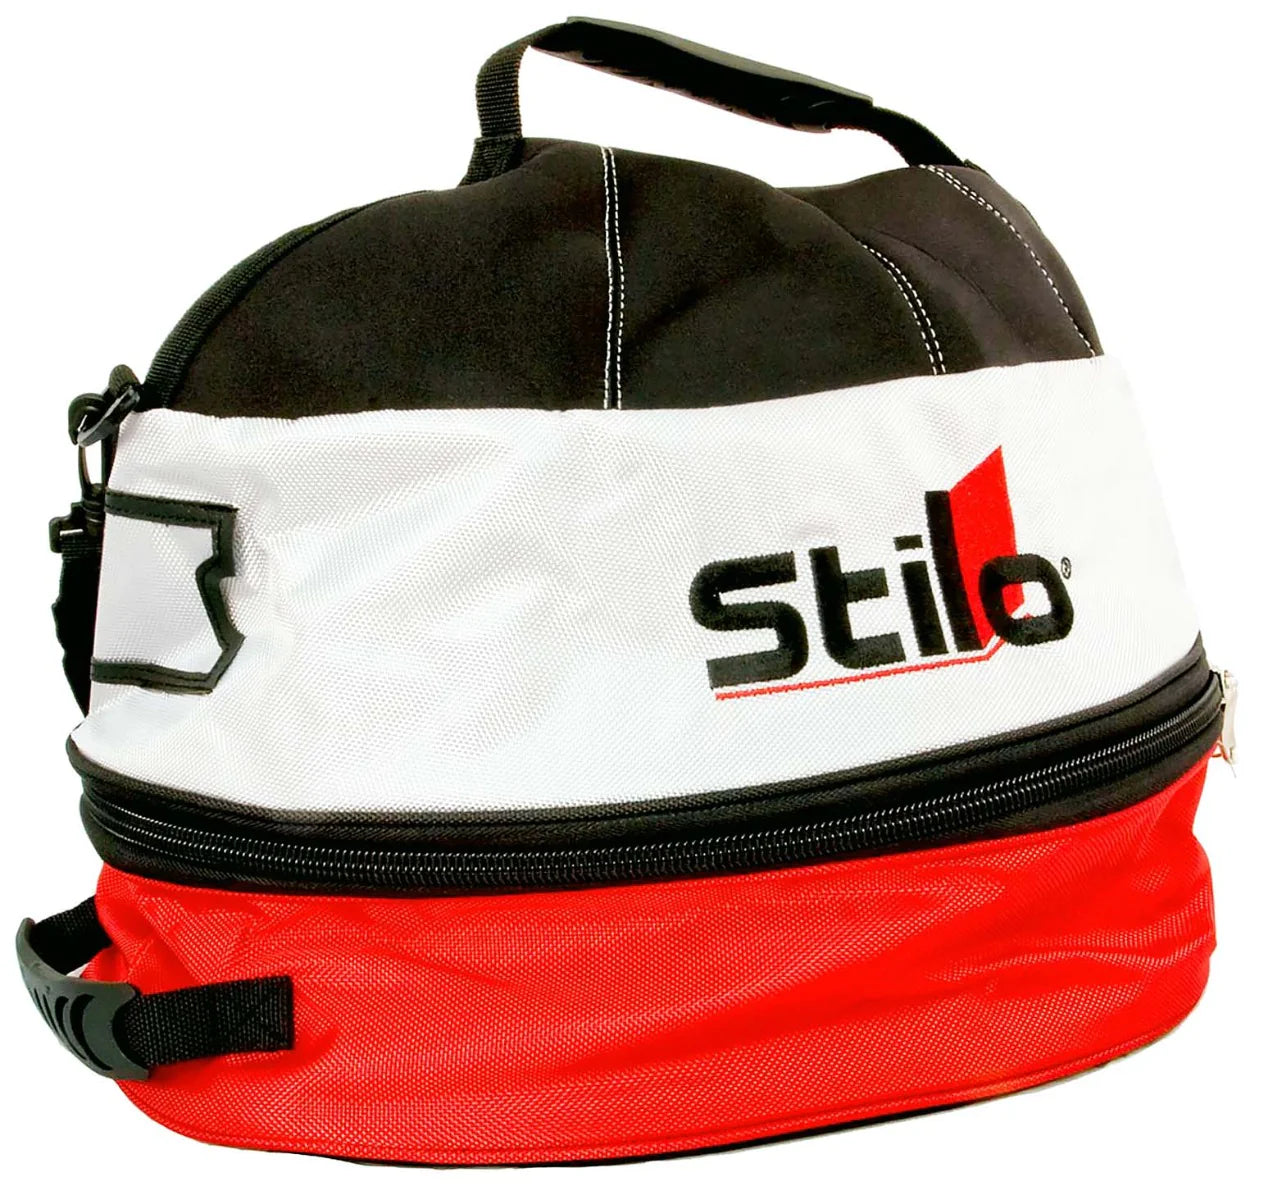 Stilo ST5 GT ZERO 8860-2018 Carbon Fiber Helmet in stock with the biggest discounts for the lowest price and best deal helmet bag IMAGE